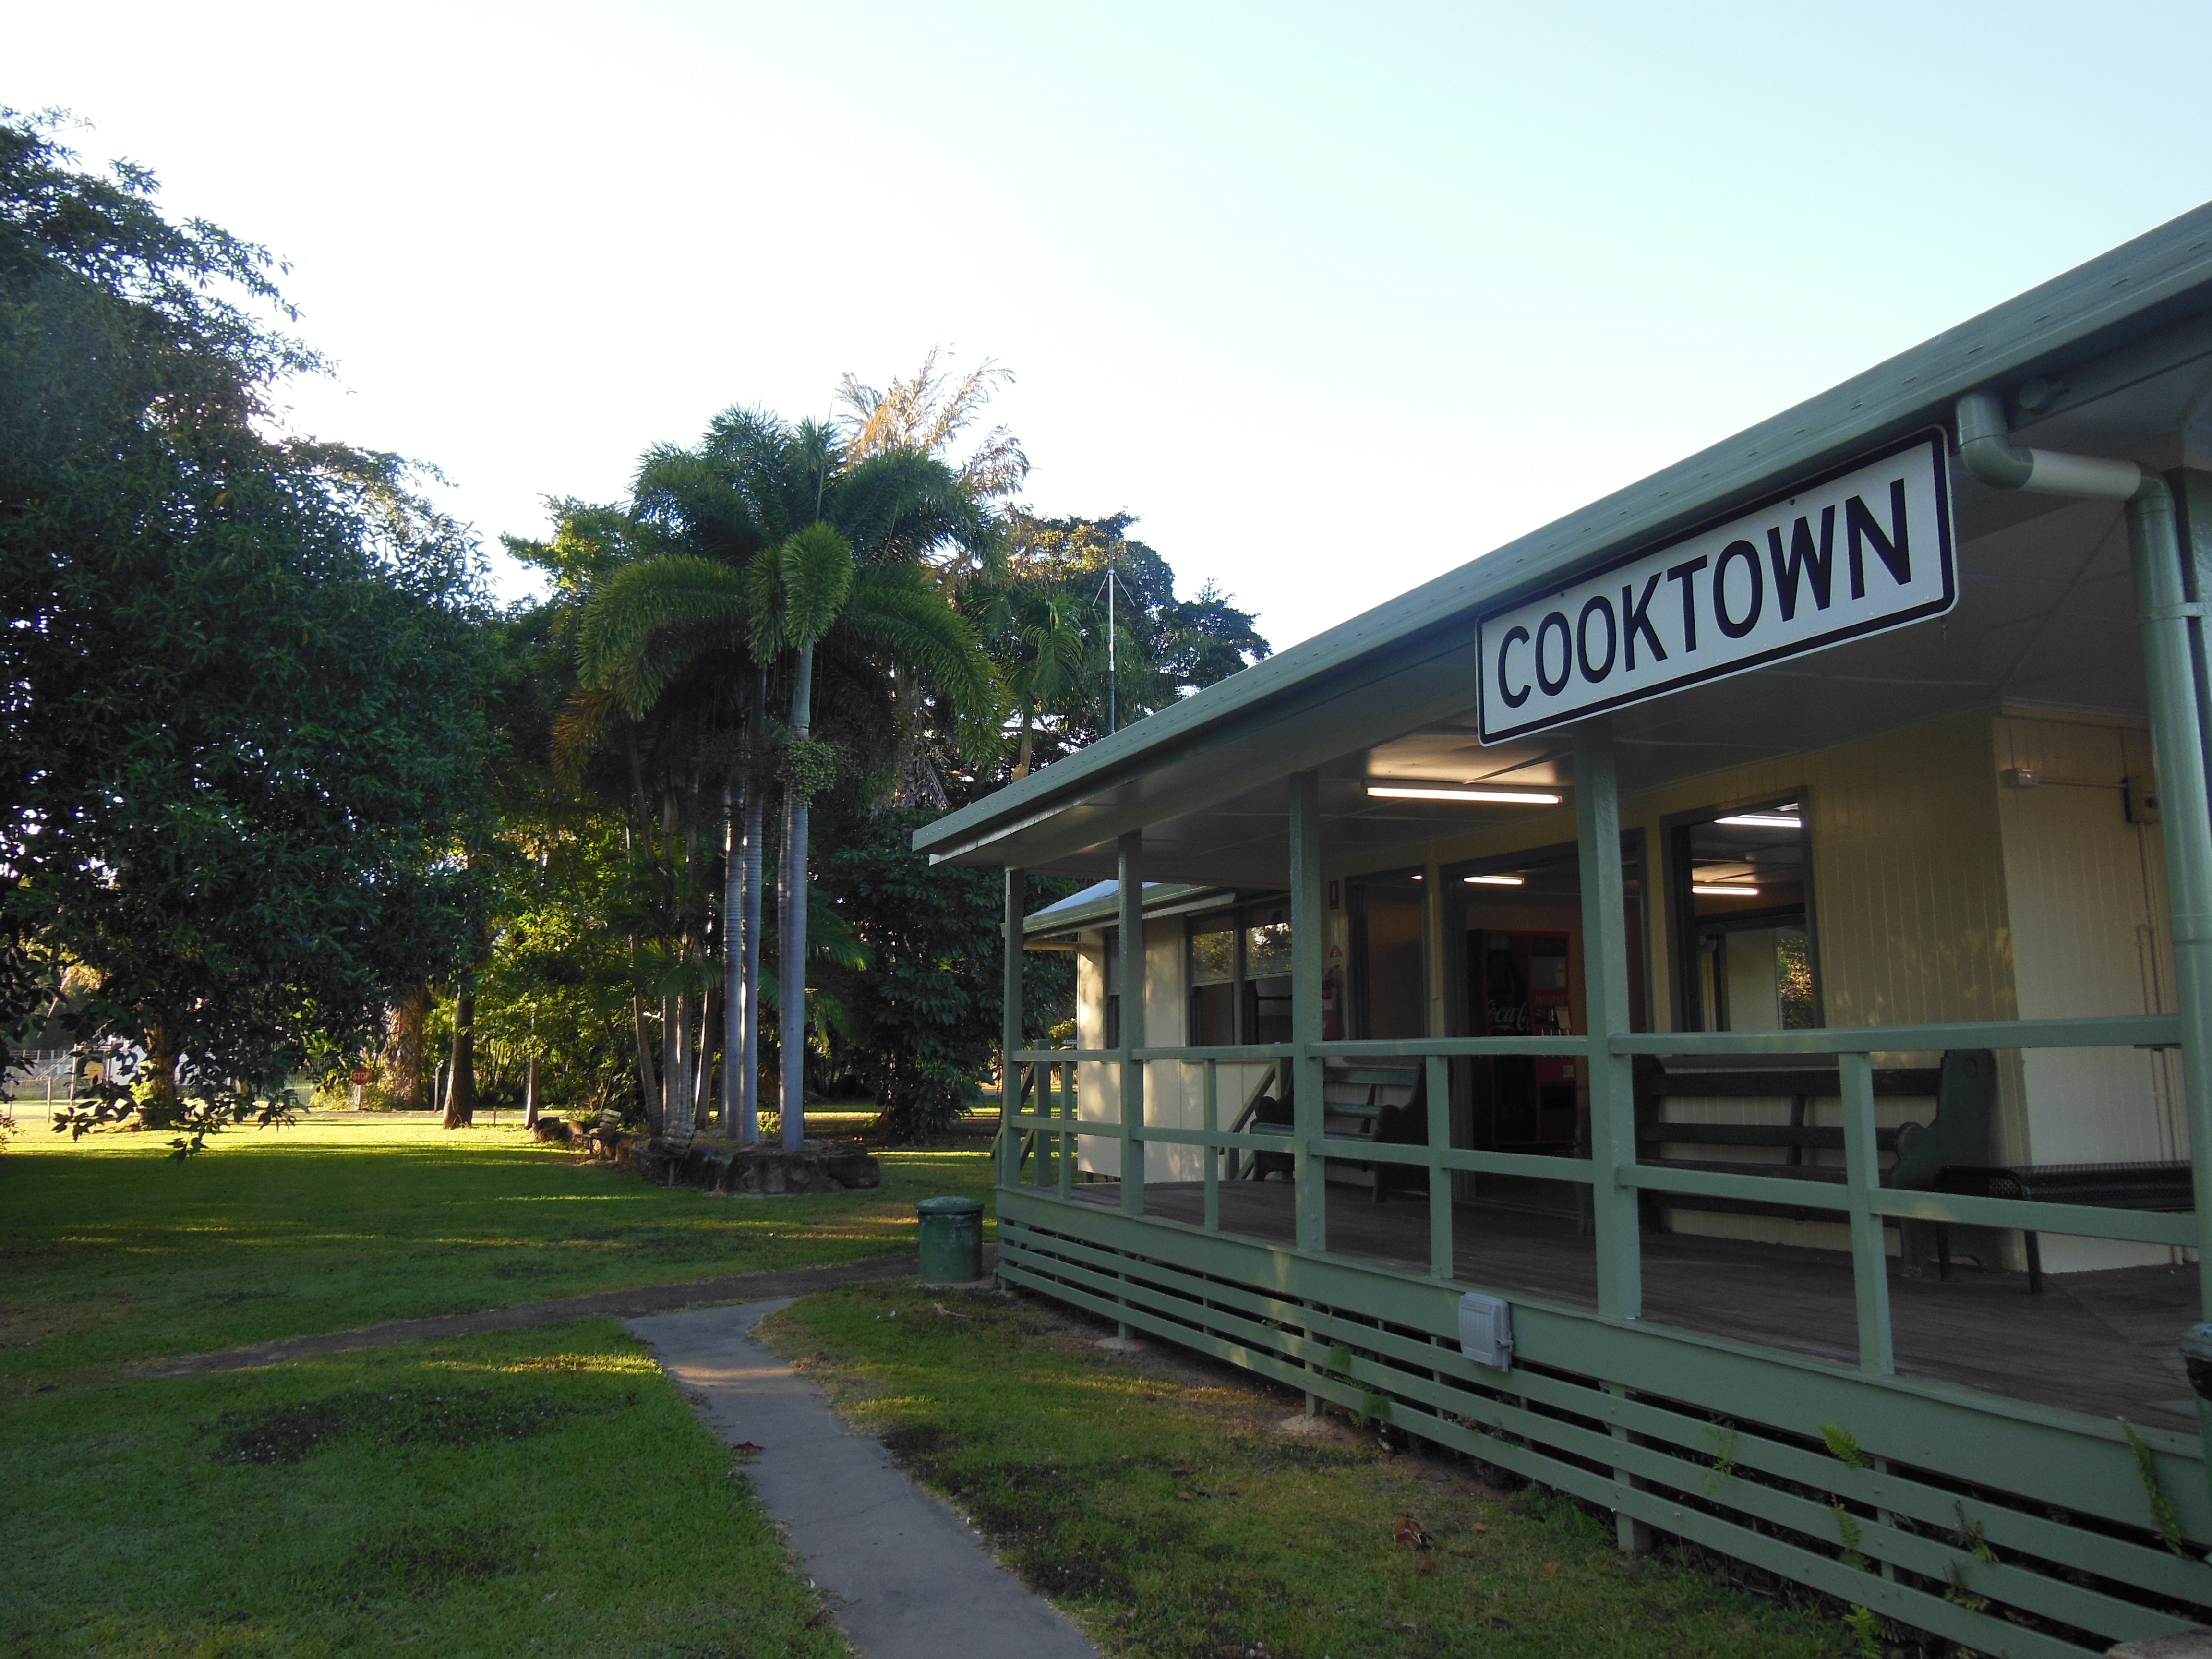 Discovering history and travel in Cooktown Australia